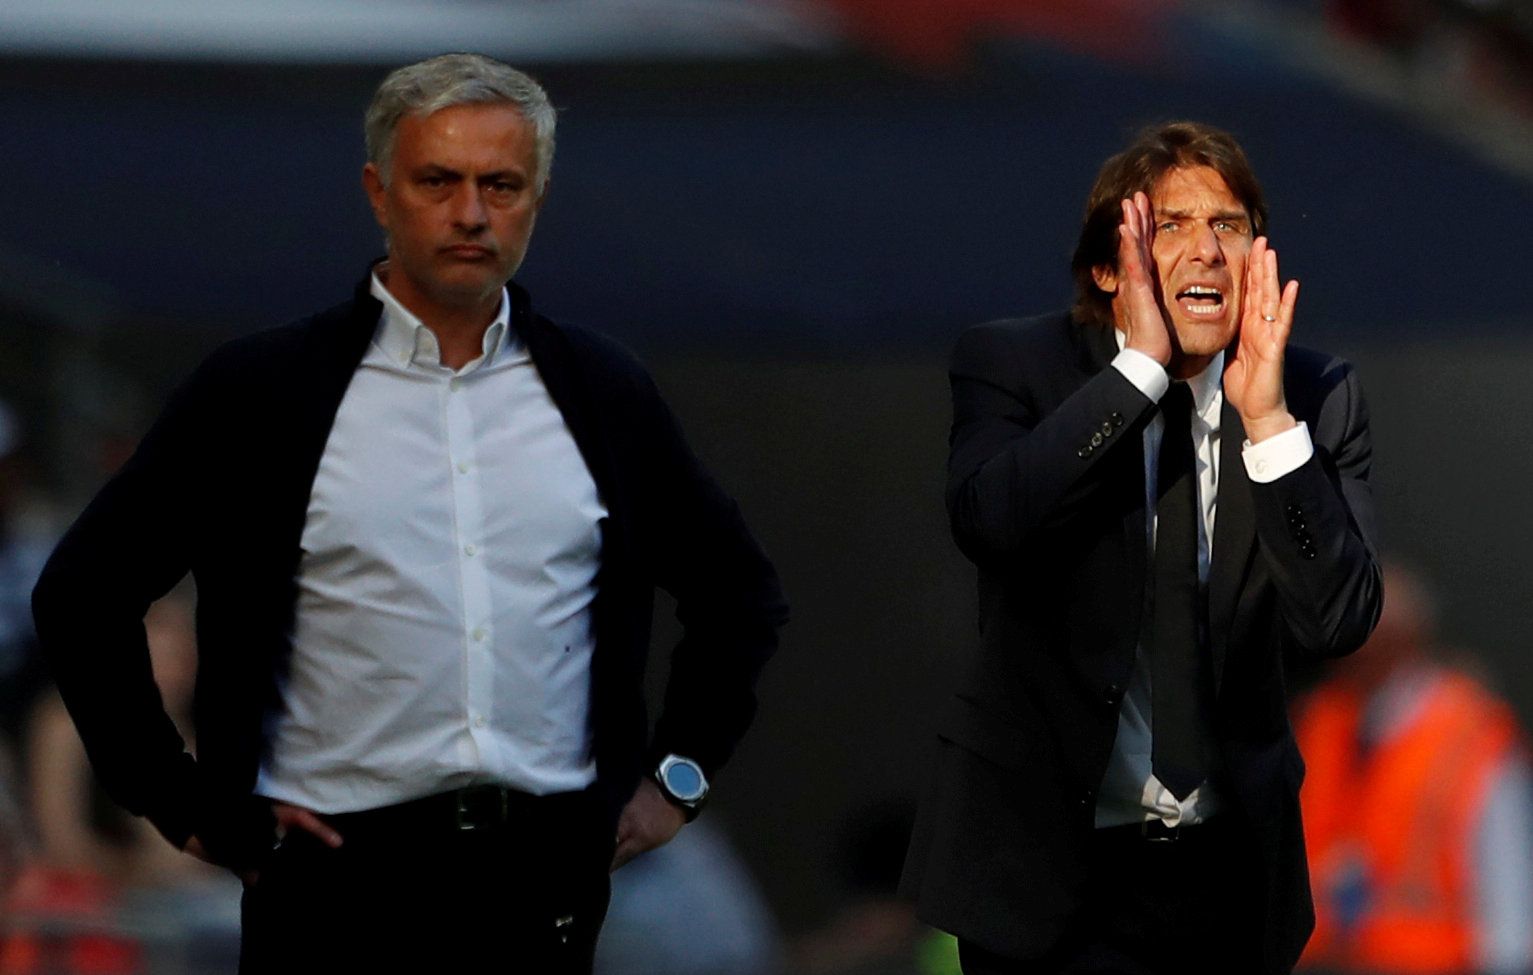 Soccer Football - FA Cup Final - Chelsea vs Manchester United - Wembley Stadium, London, Britain - May 19, 2018   Manchester United manager Jose Mourinho looks on as Chelsea manager Antonio Conte reacts   Action Images via Reuters/Lee Smith     TPX IMAGES OF THE DAY